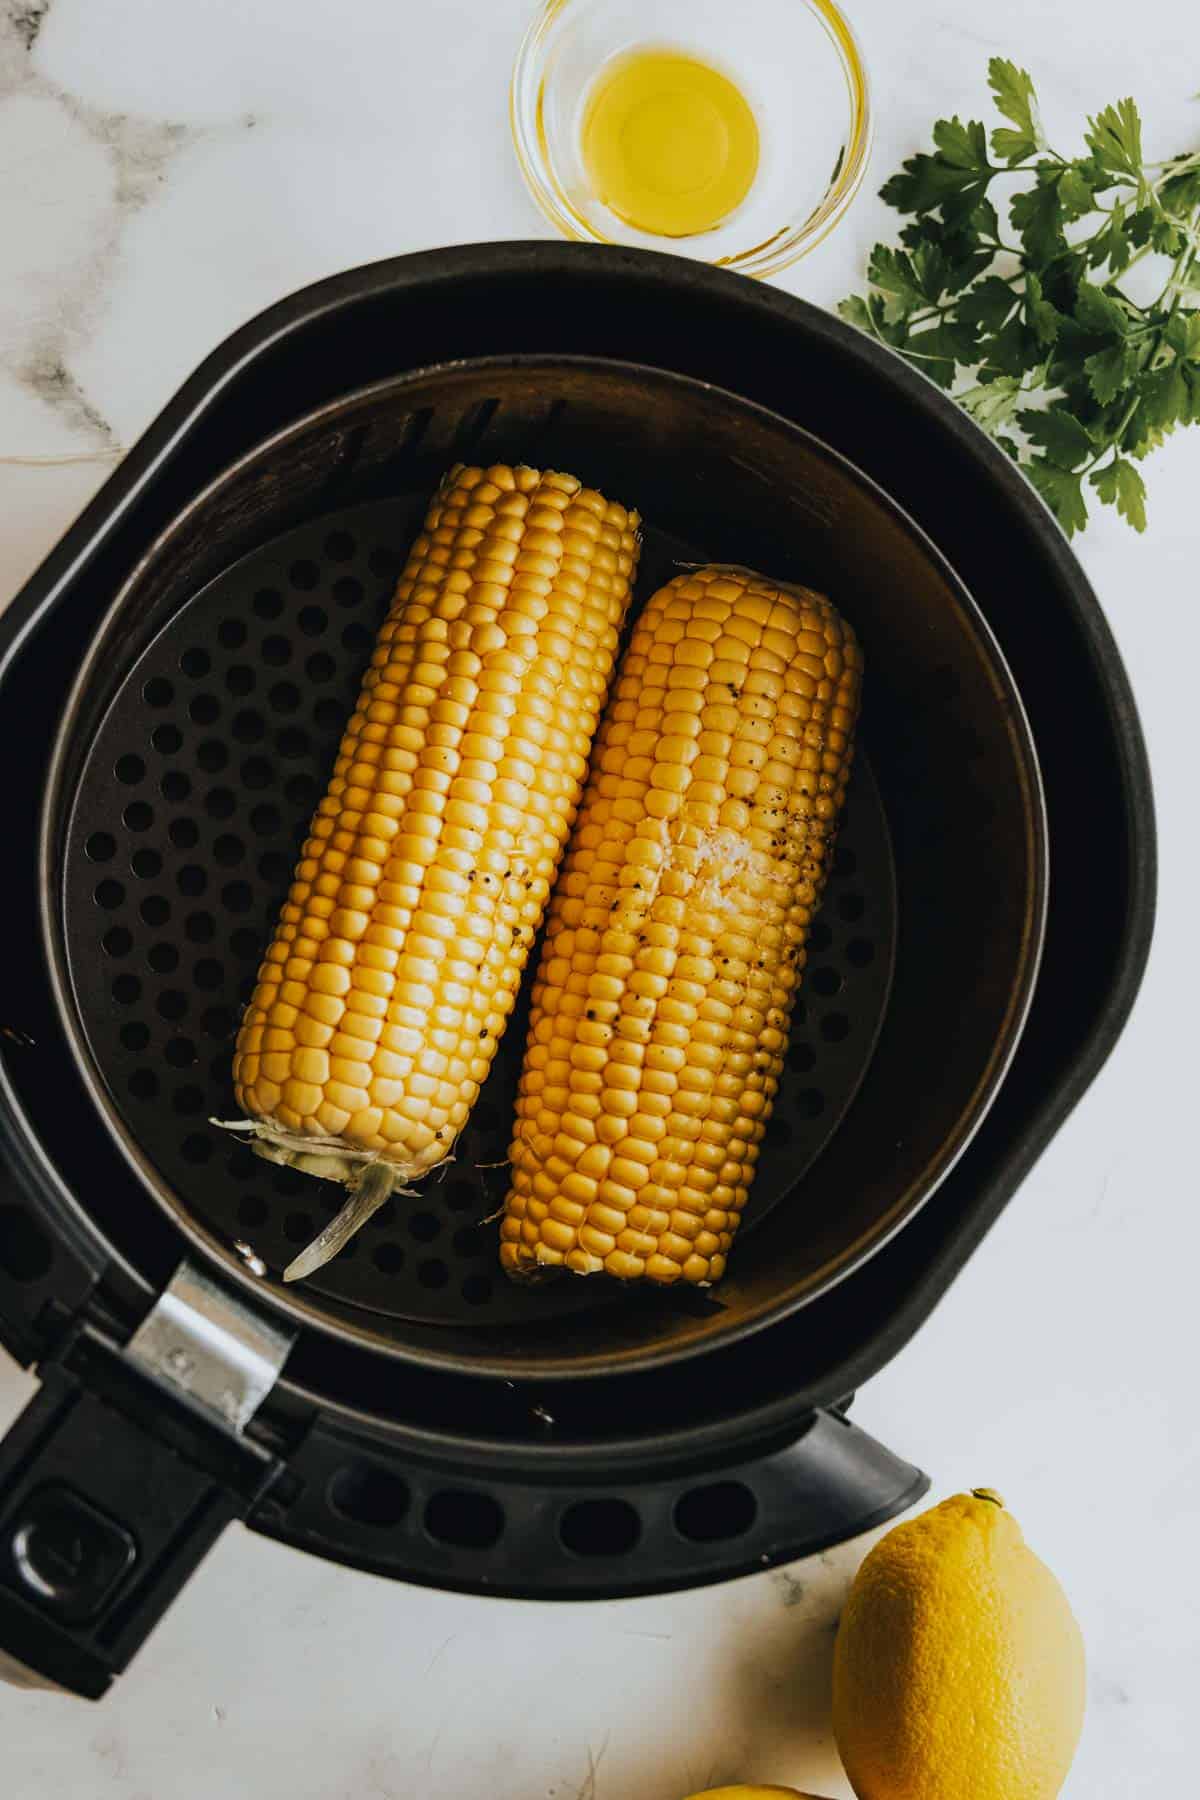 An air fryer with corn on the cob and lemons.